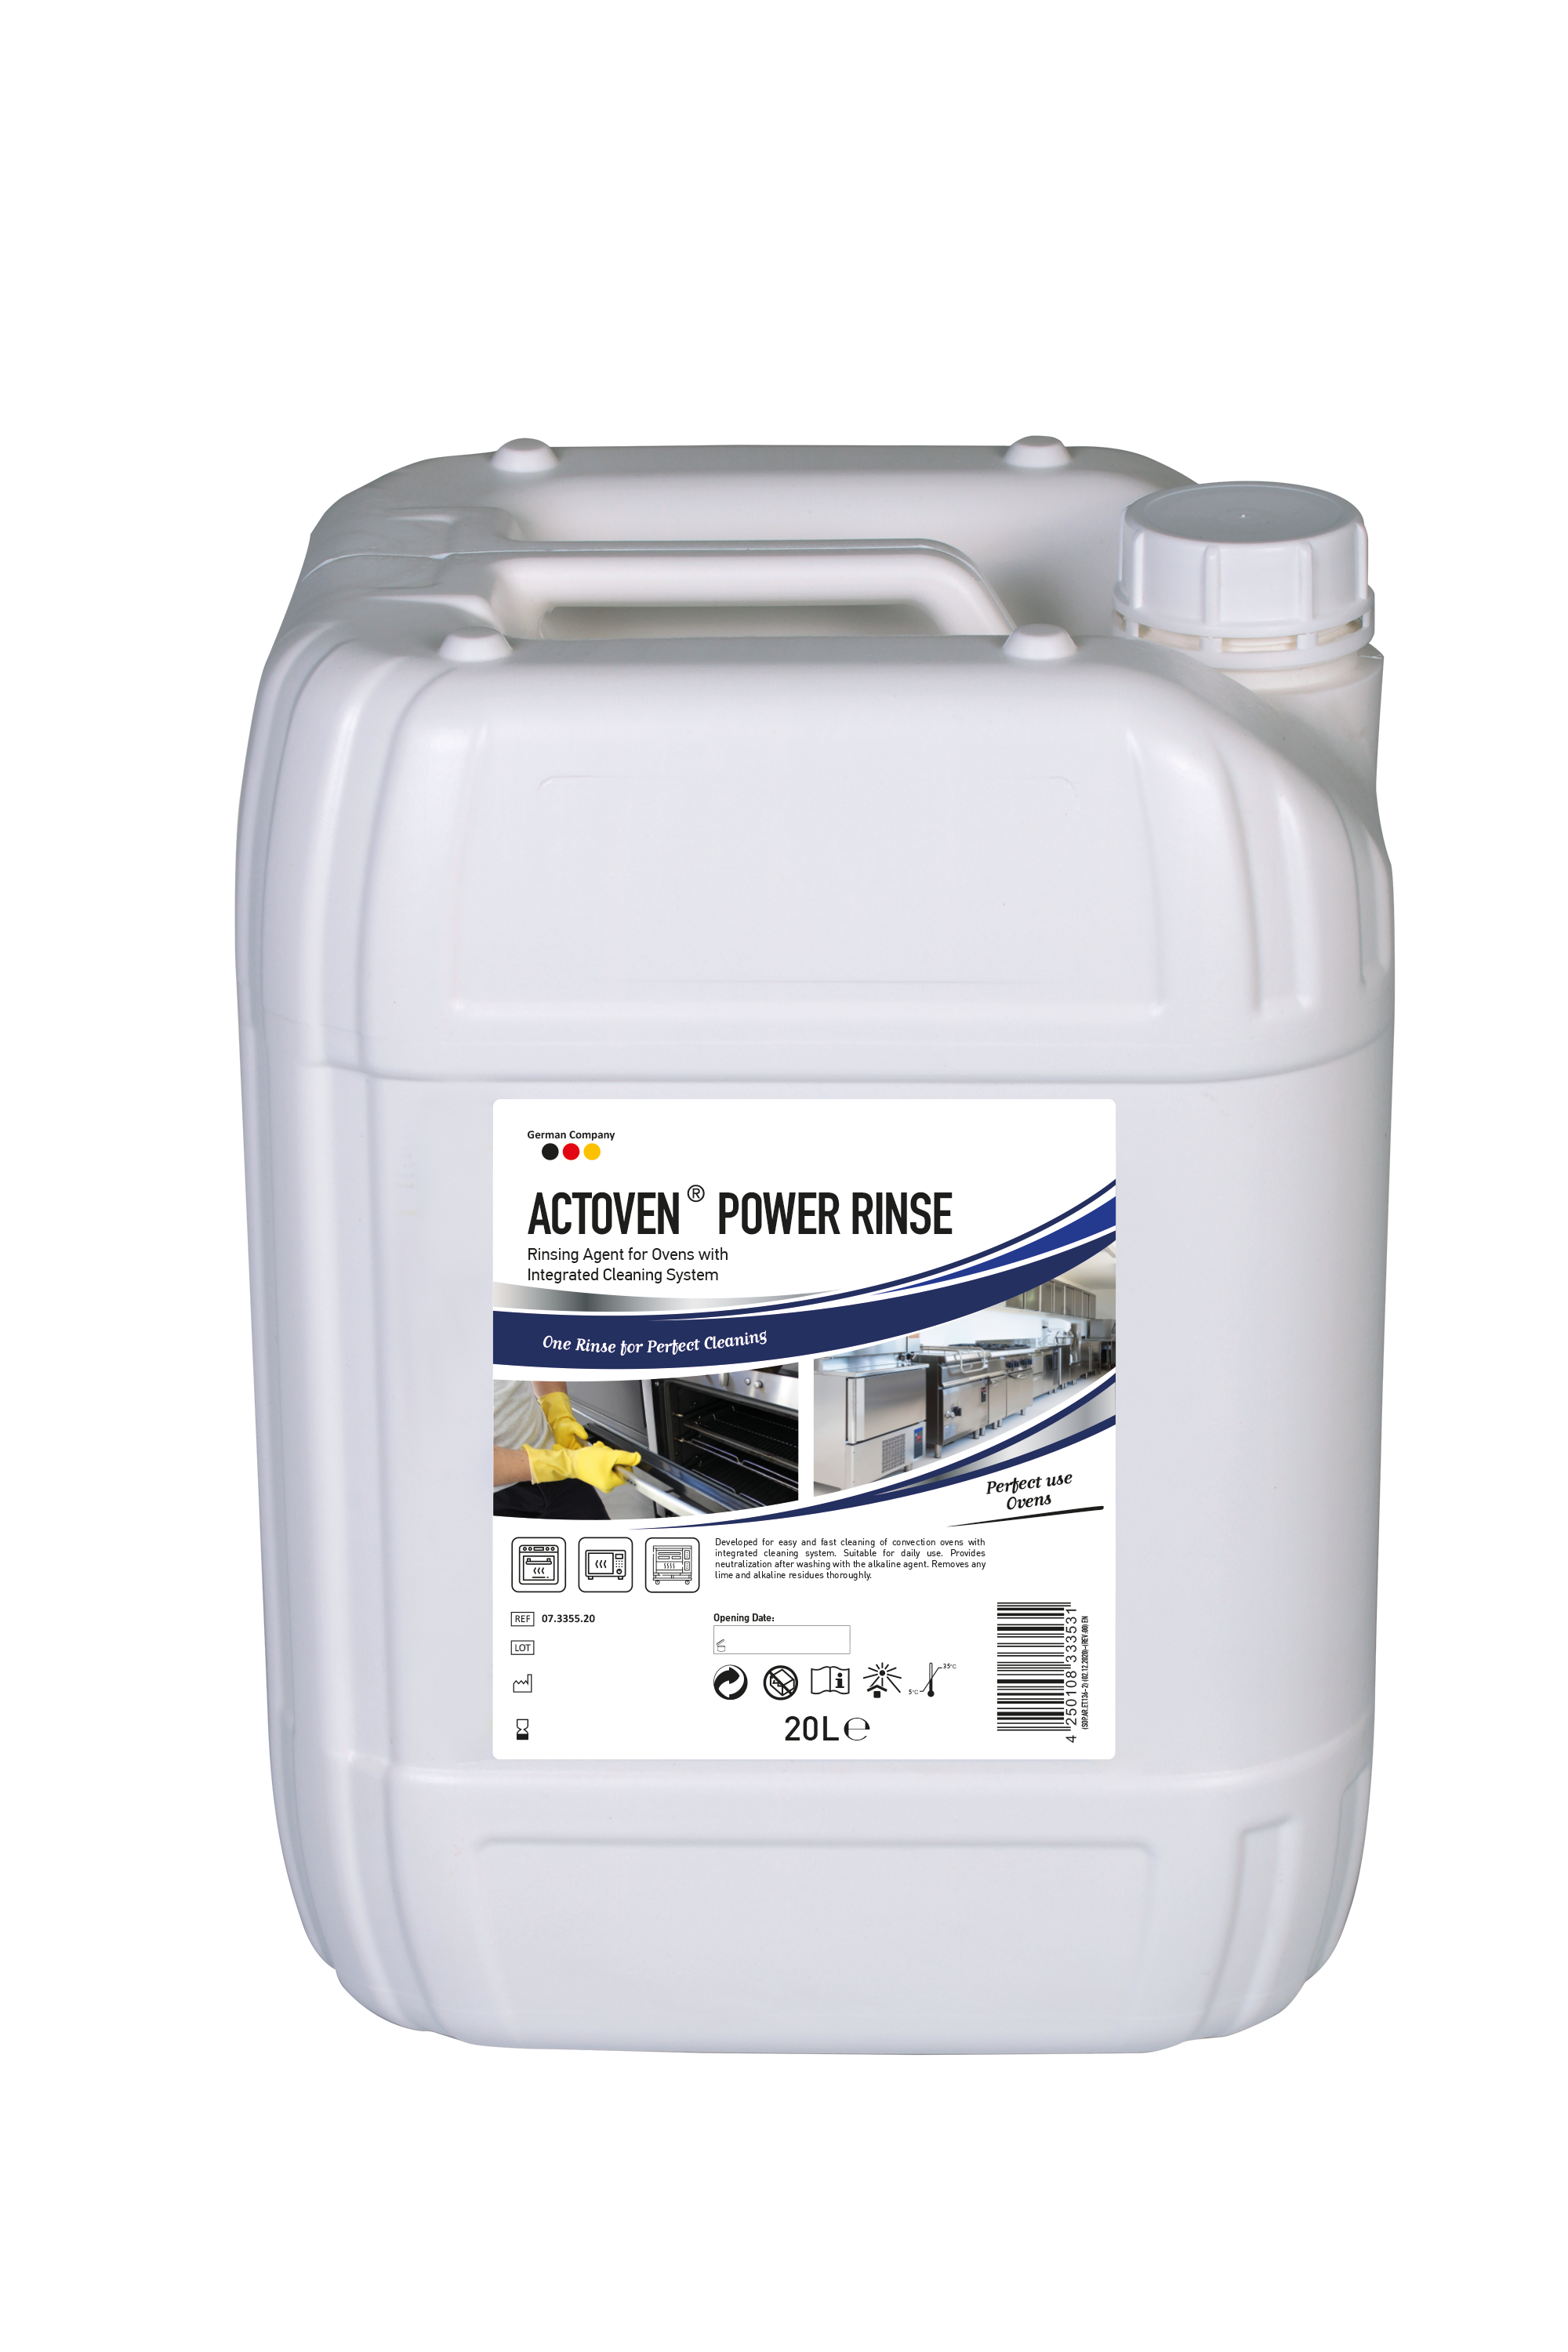 ACTOVEN POWER RINSE